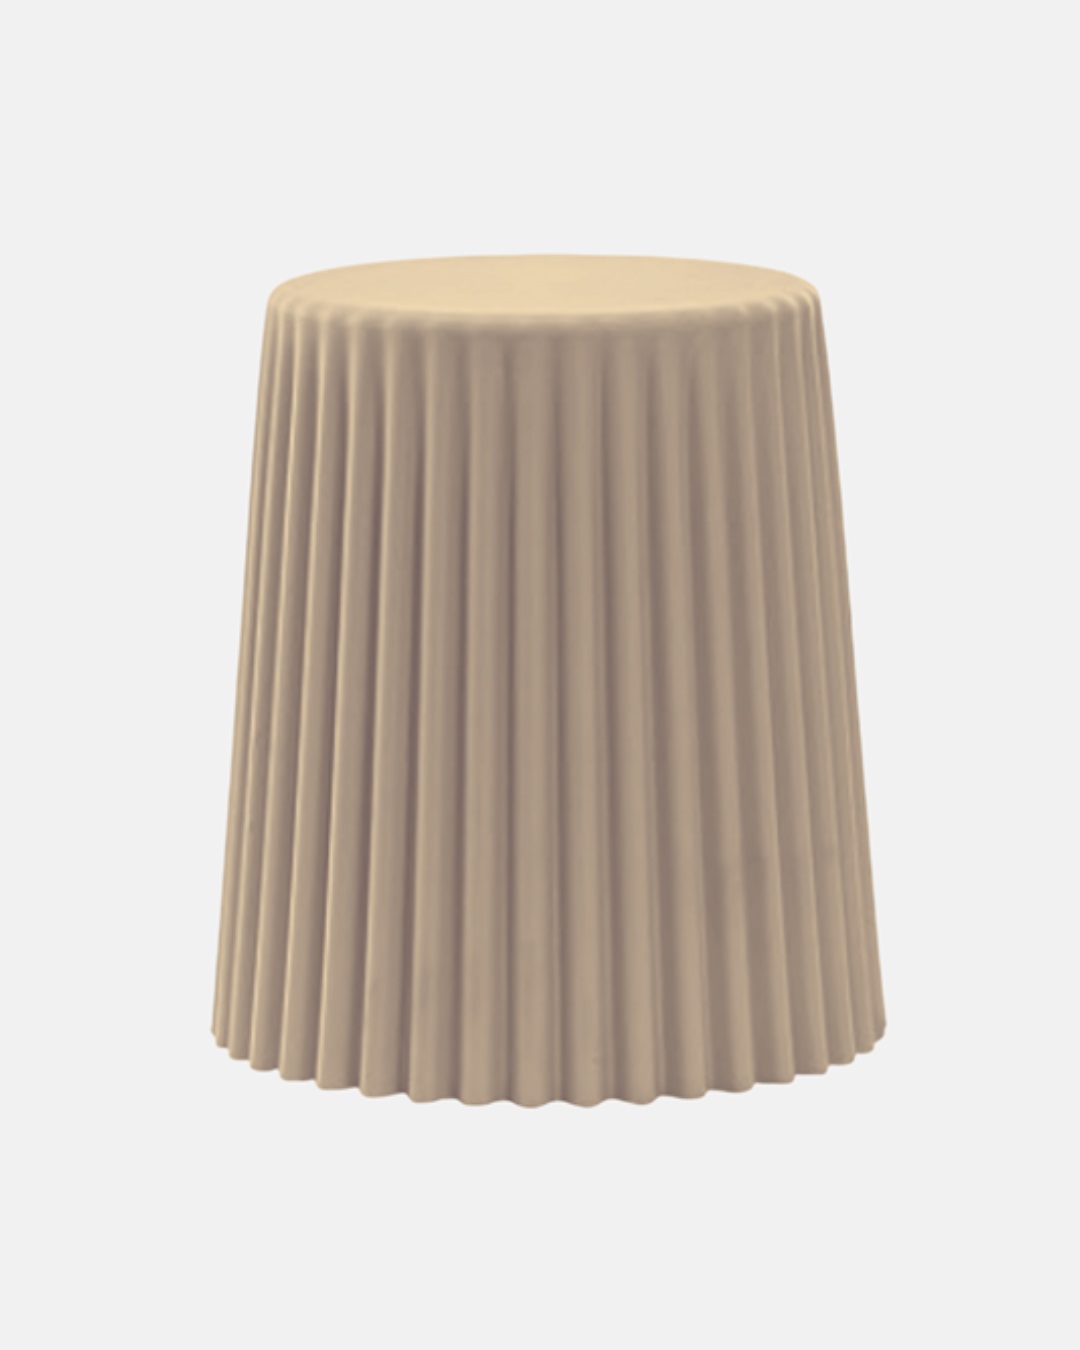 Nude Tom stool or side table